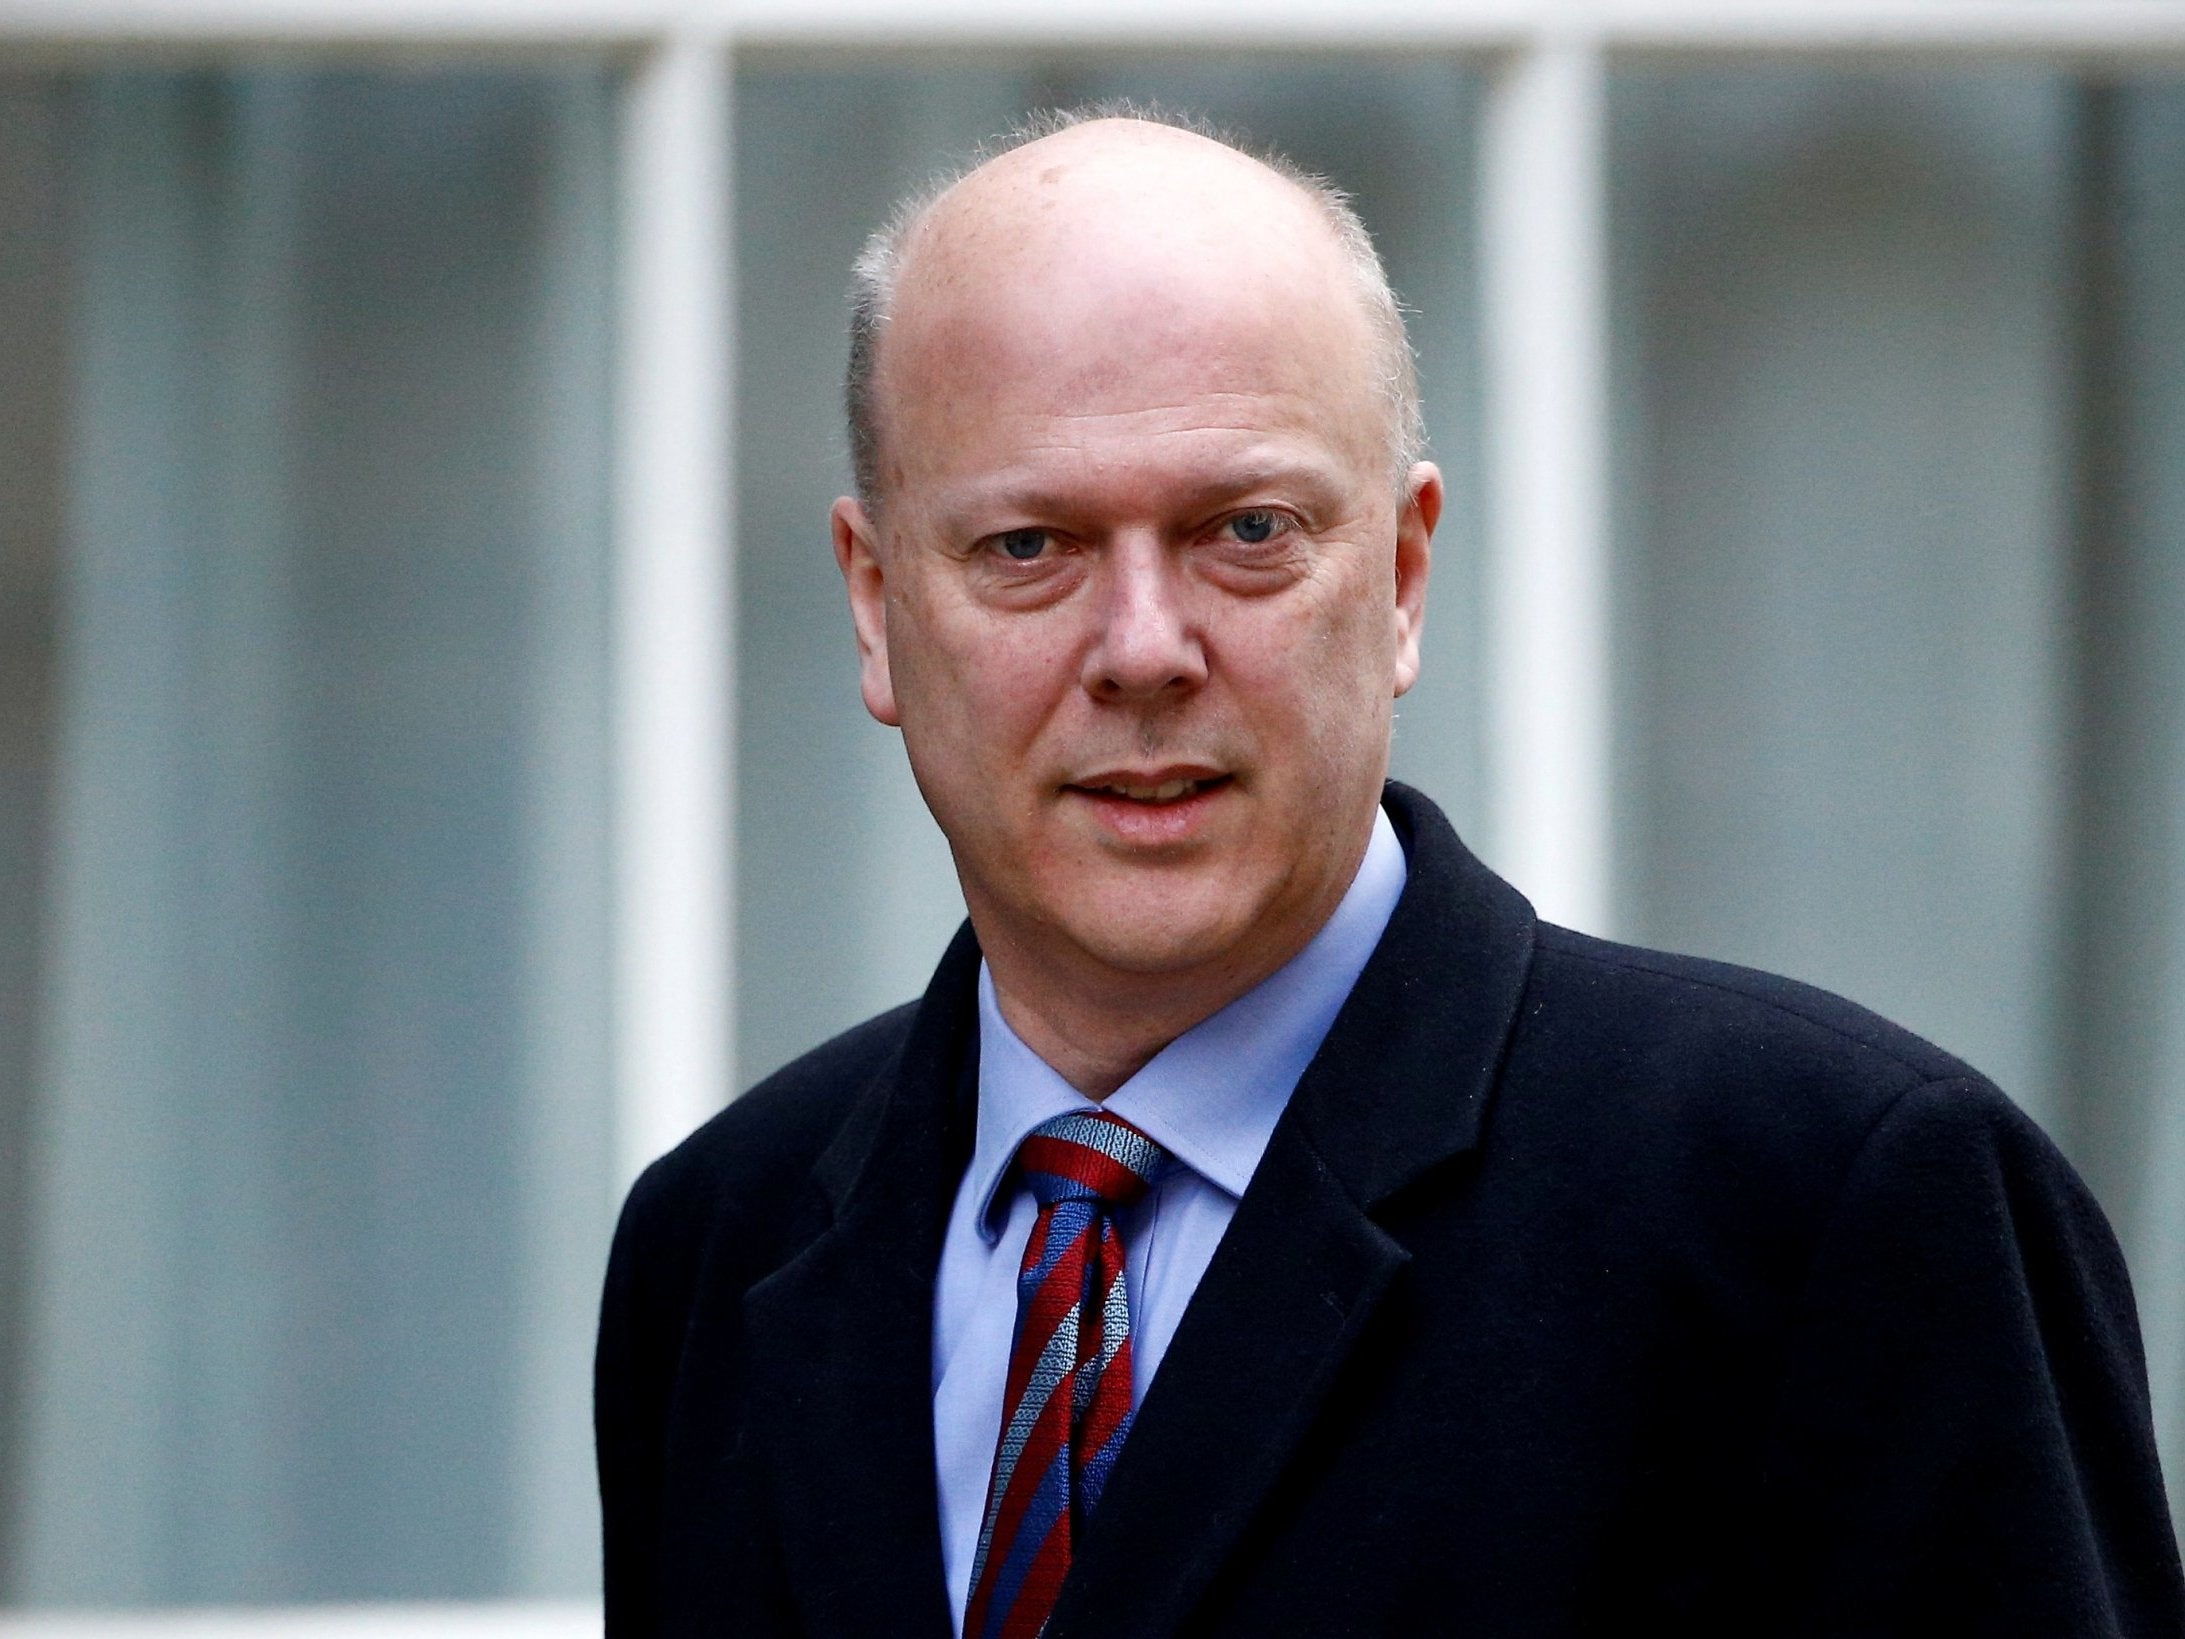 The announcement is the government's third major climbdown on controversial reforms headed by Chris Grayling in 2014